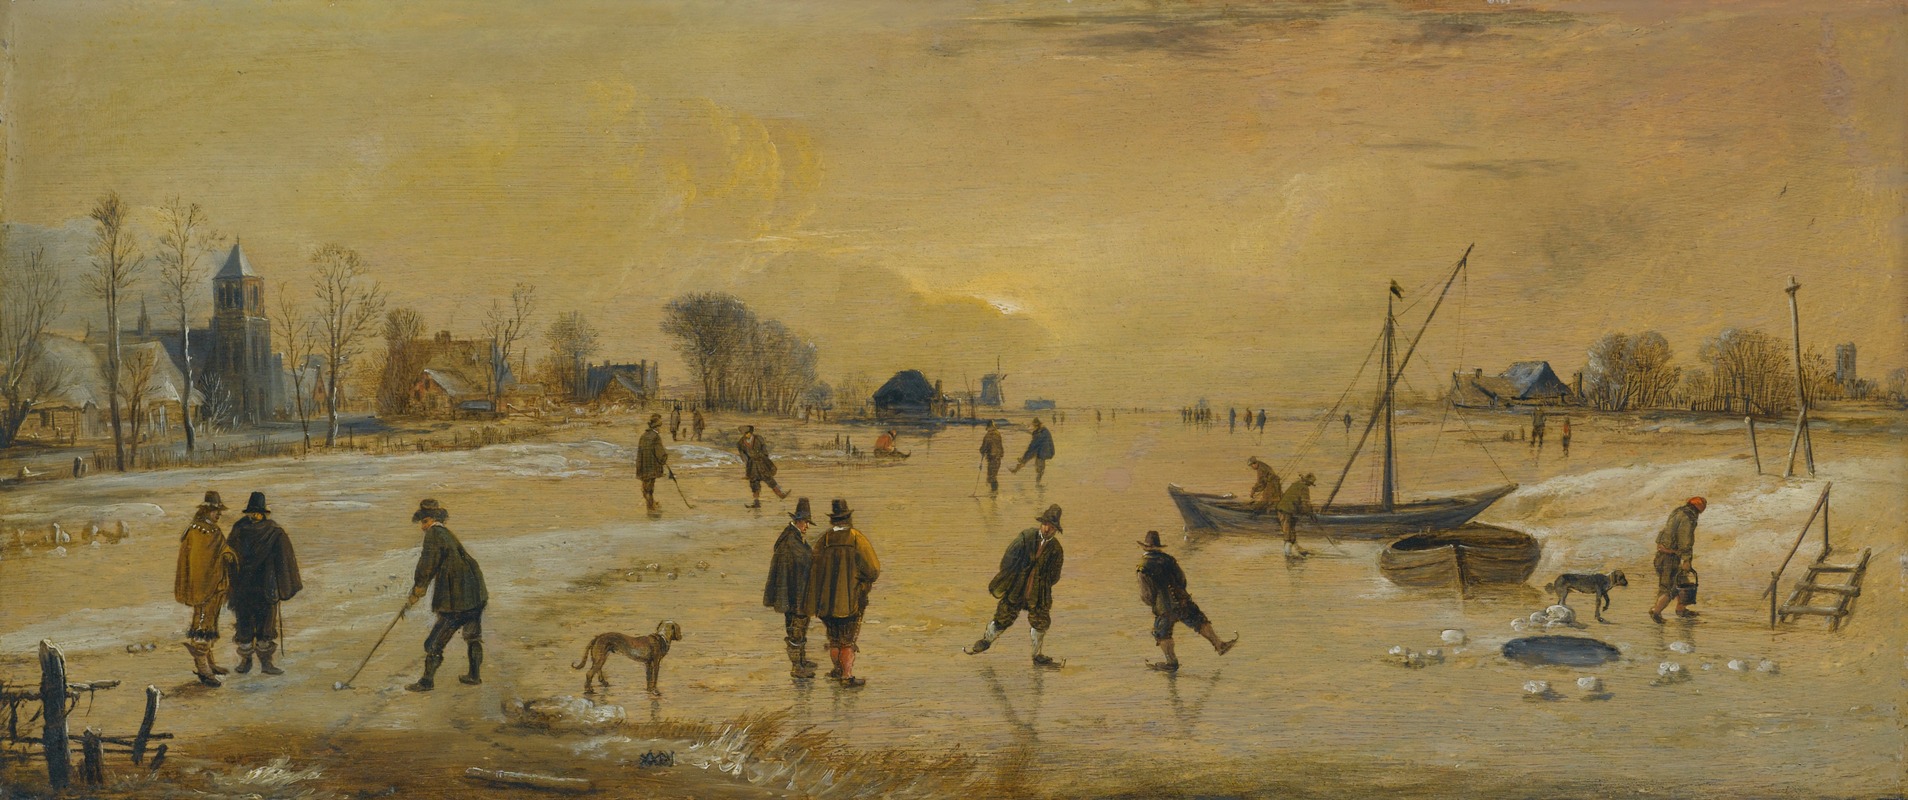 Aert van der Neer - A Winter Landscape With Skaters And Kolf Players, A Village To The Left